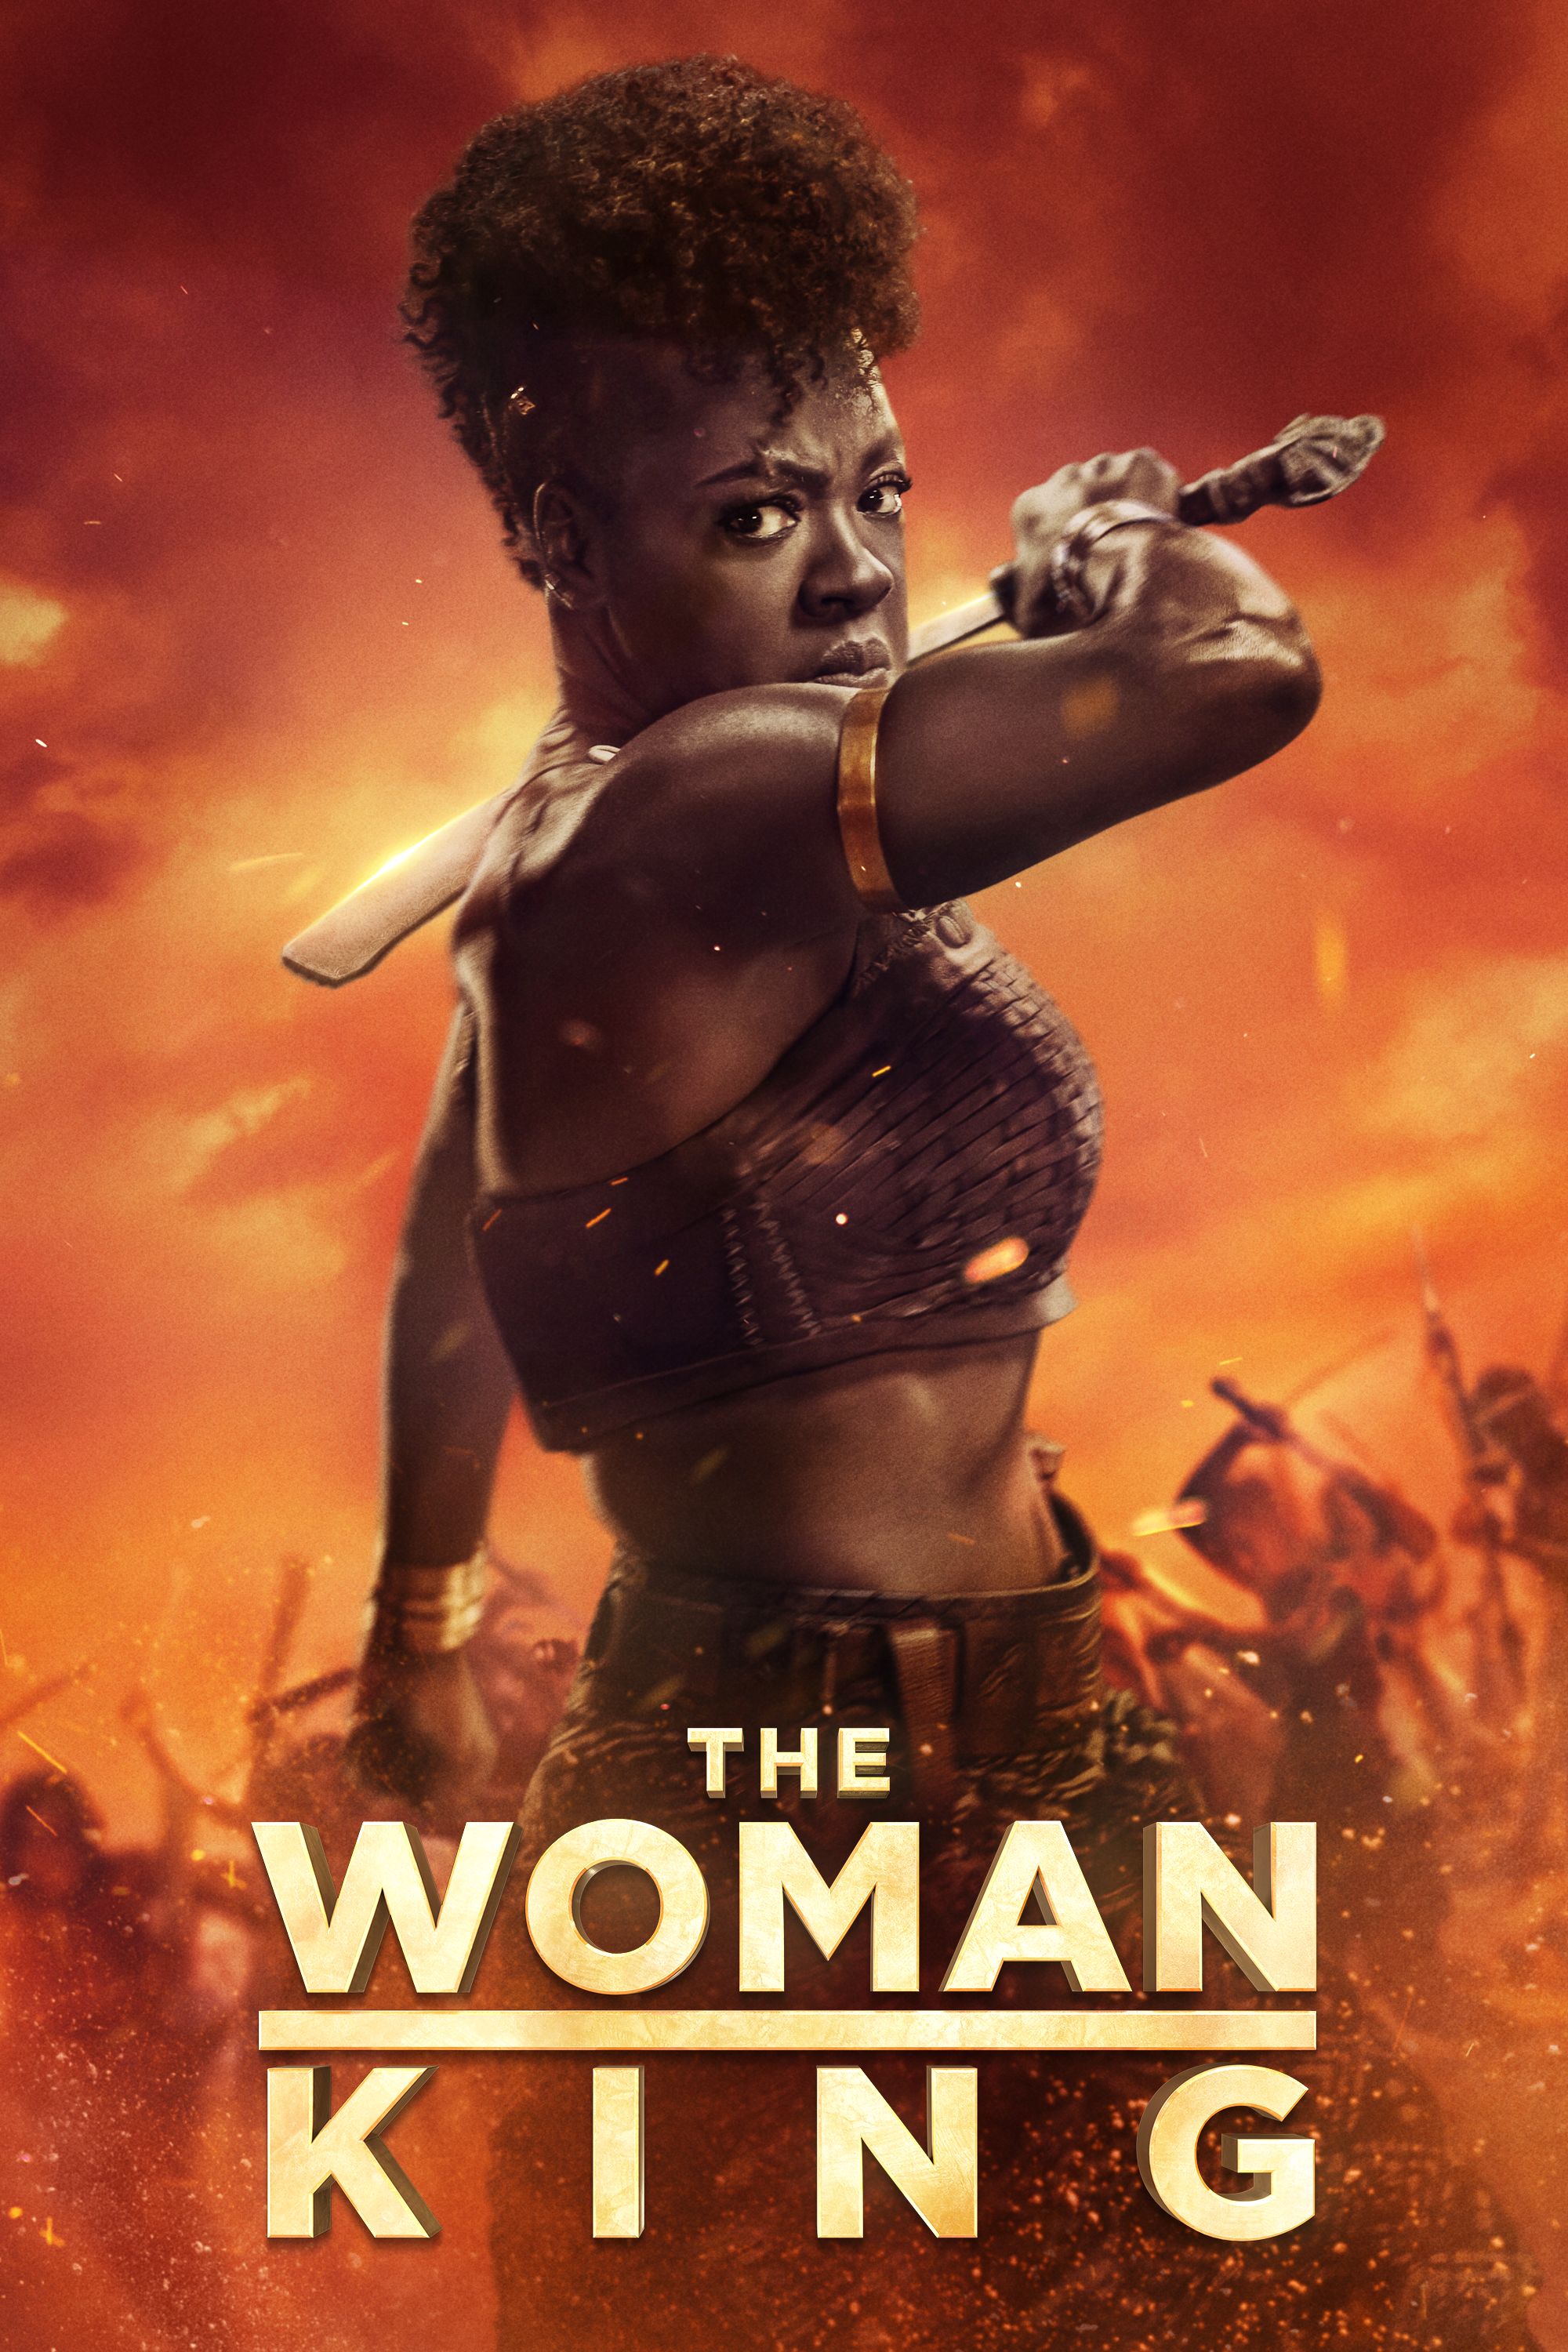 christian movie review the woman king